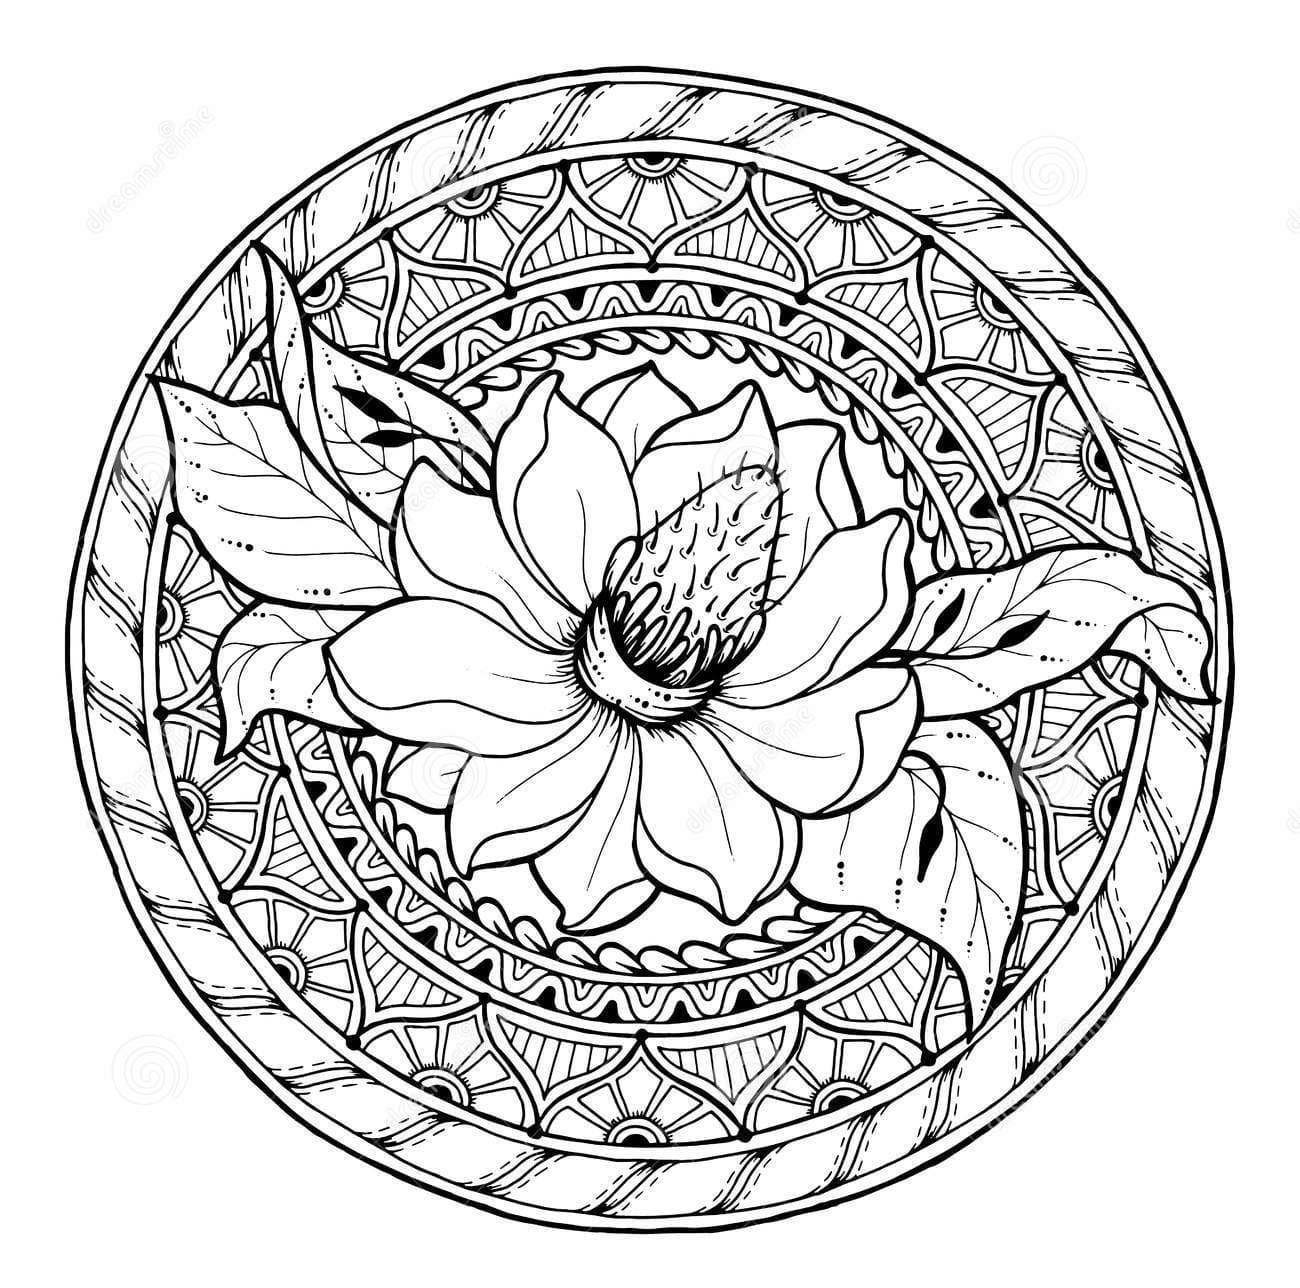 Circle Summer Doodle Flower Ornament Coloring Page